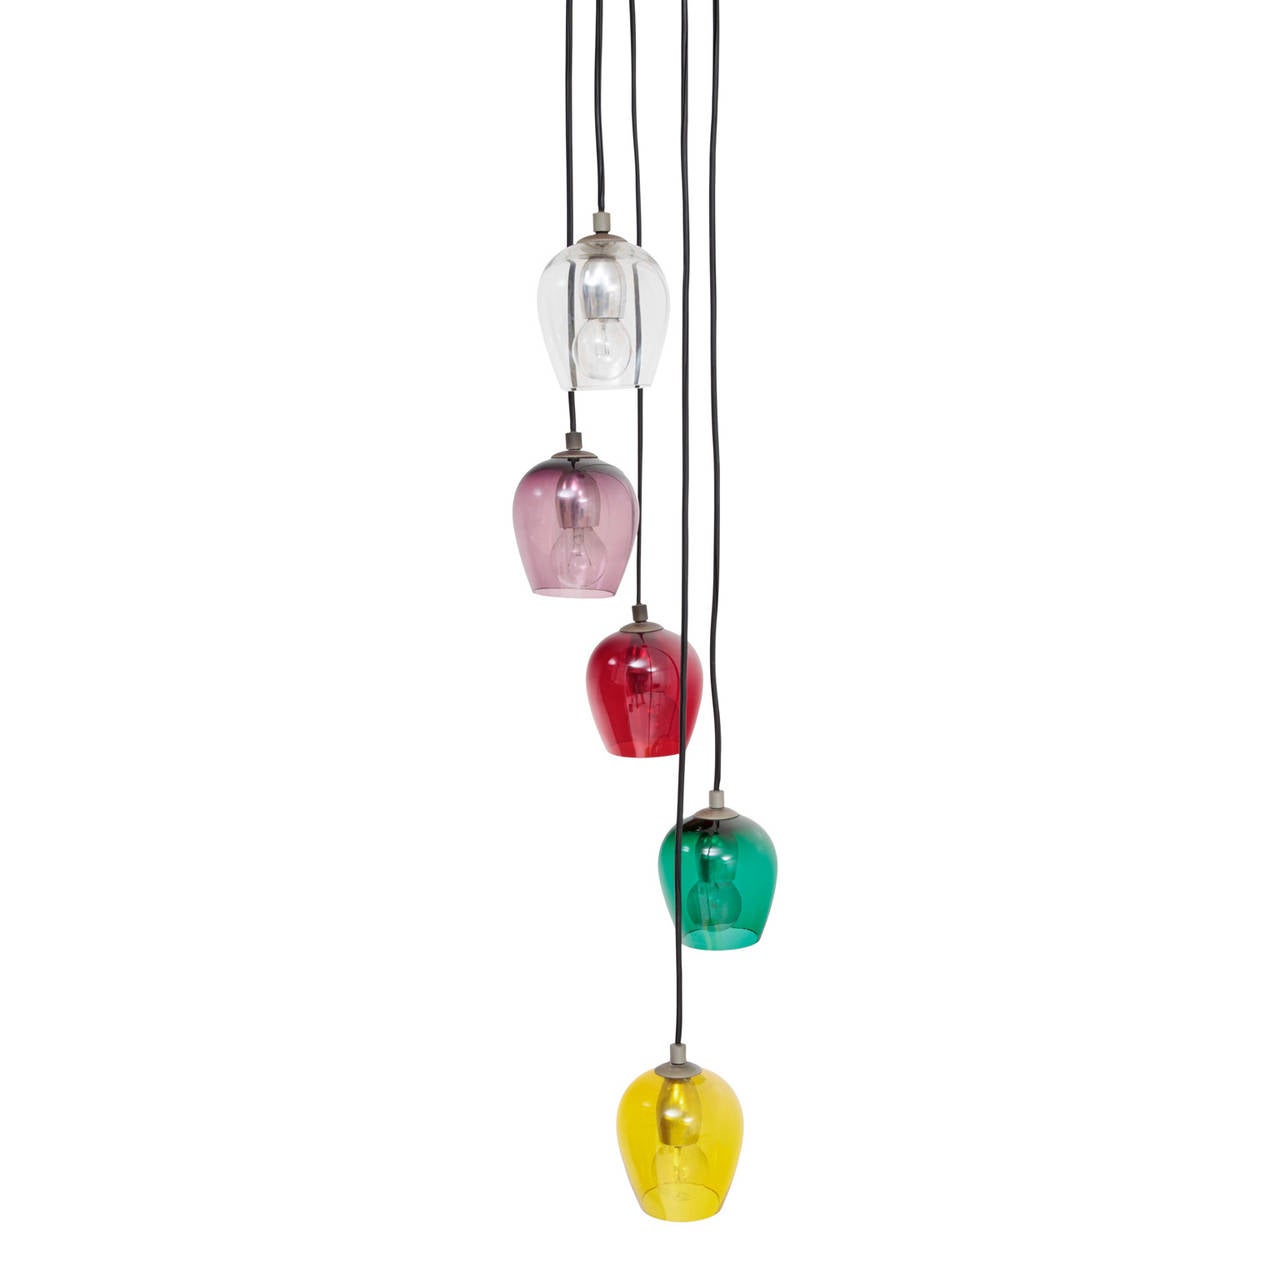 Low hanging ceiling lamp with five cup-shaped glass shades in different colours. The shades surround each other at different heights, so they form a spiral shape. A very modern and decorative object.